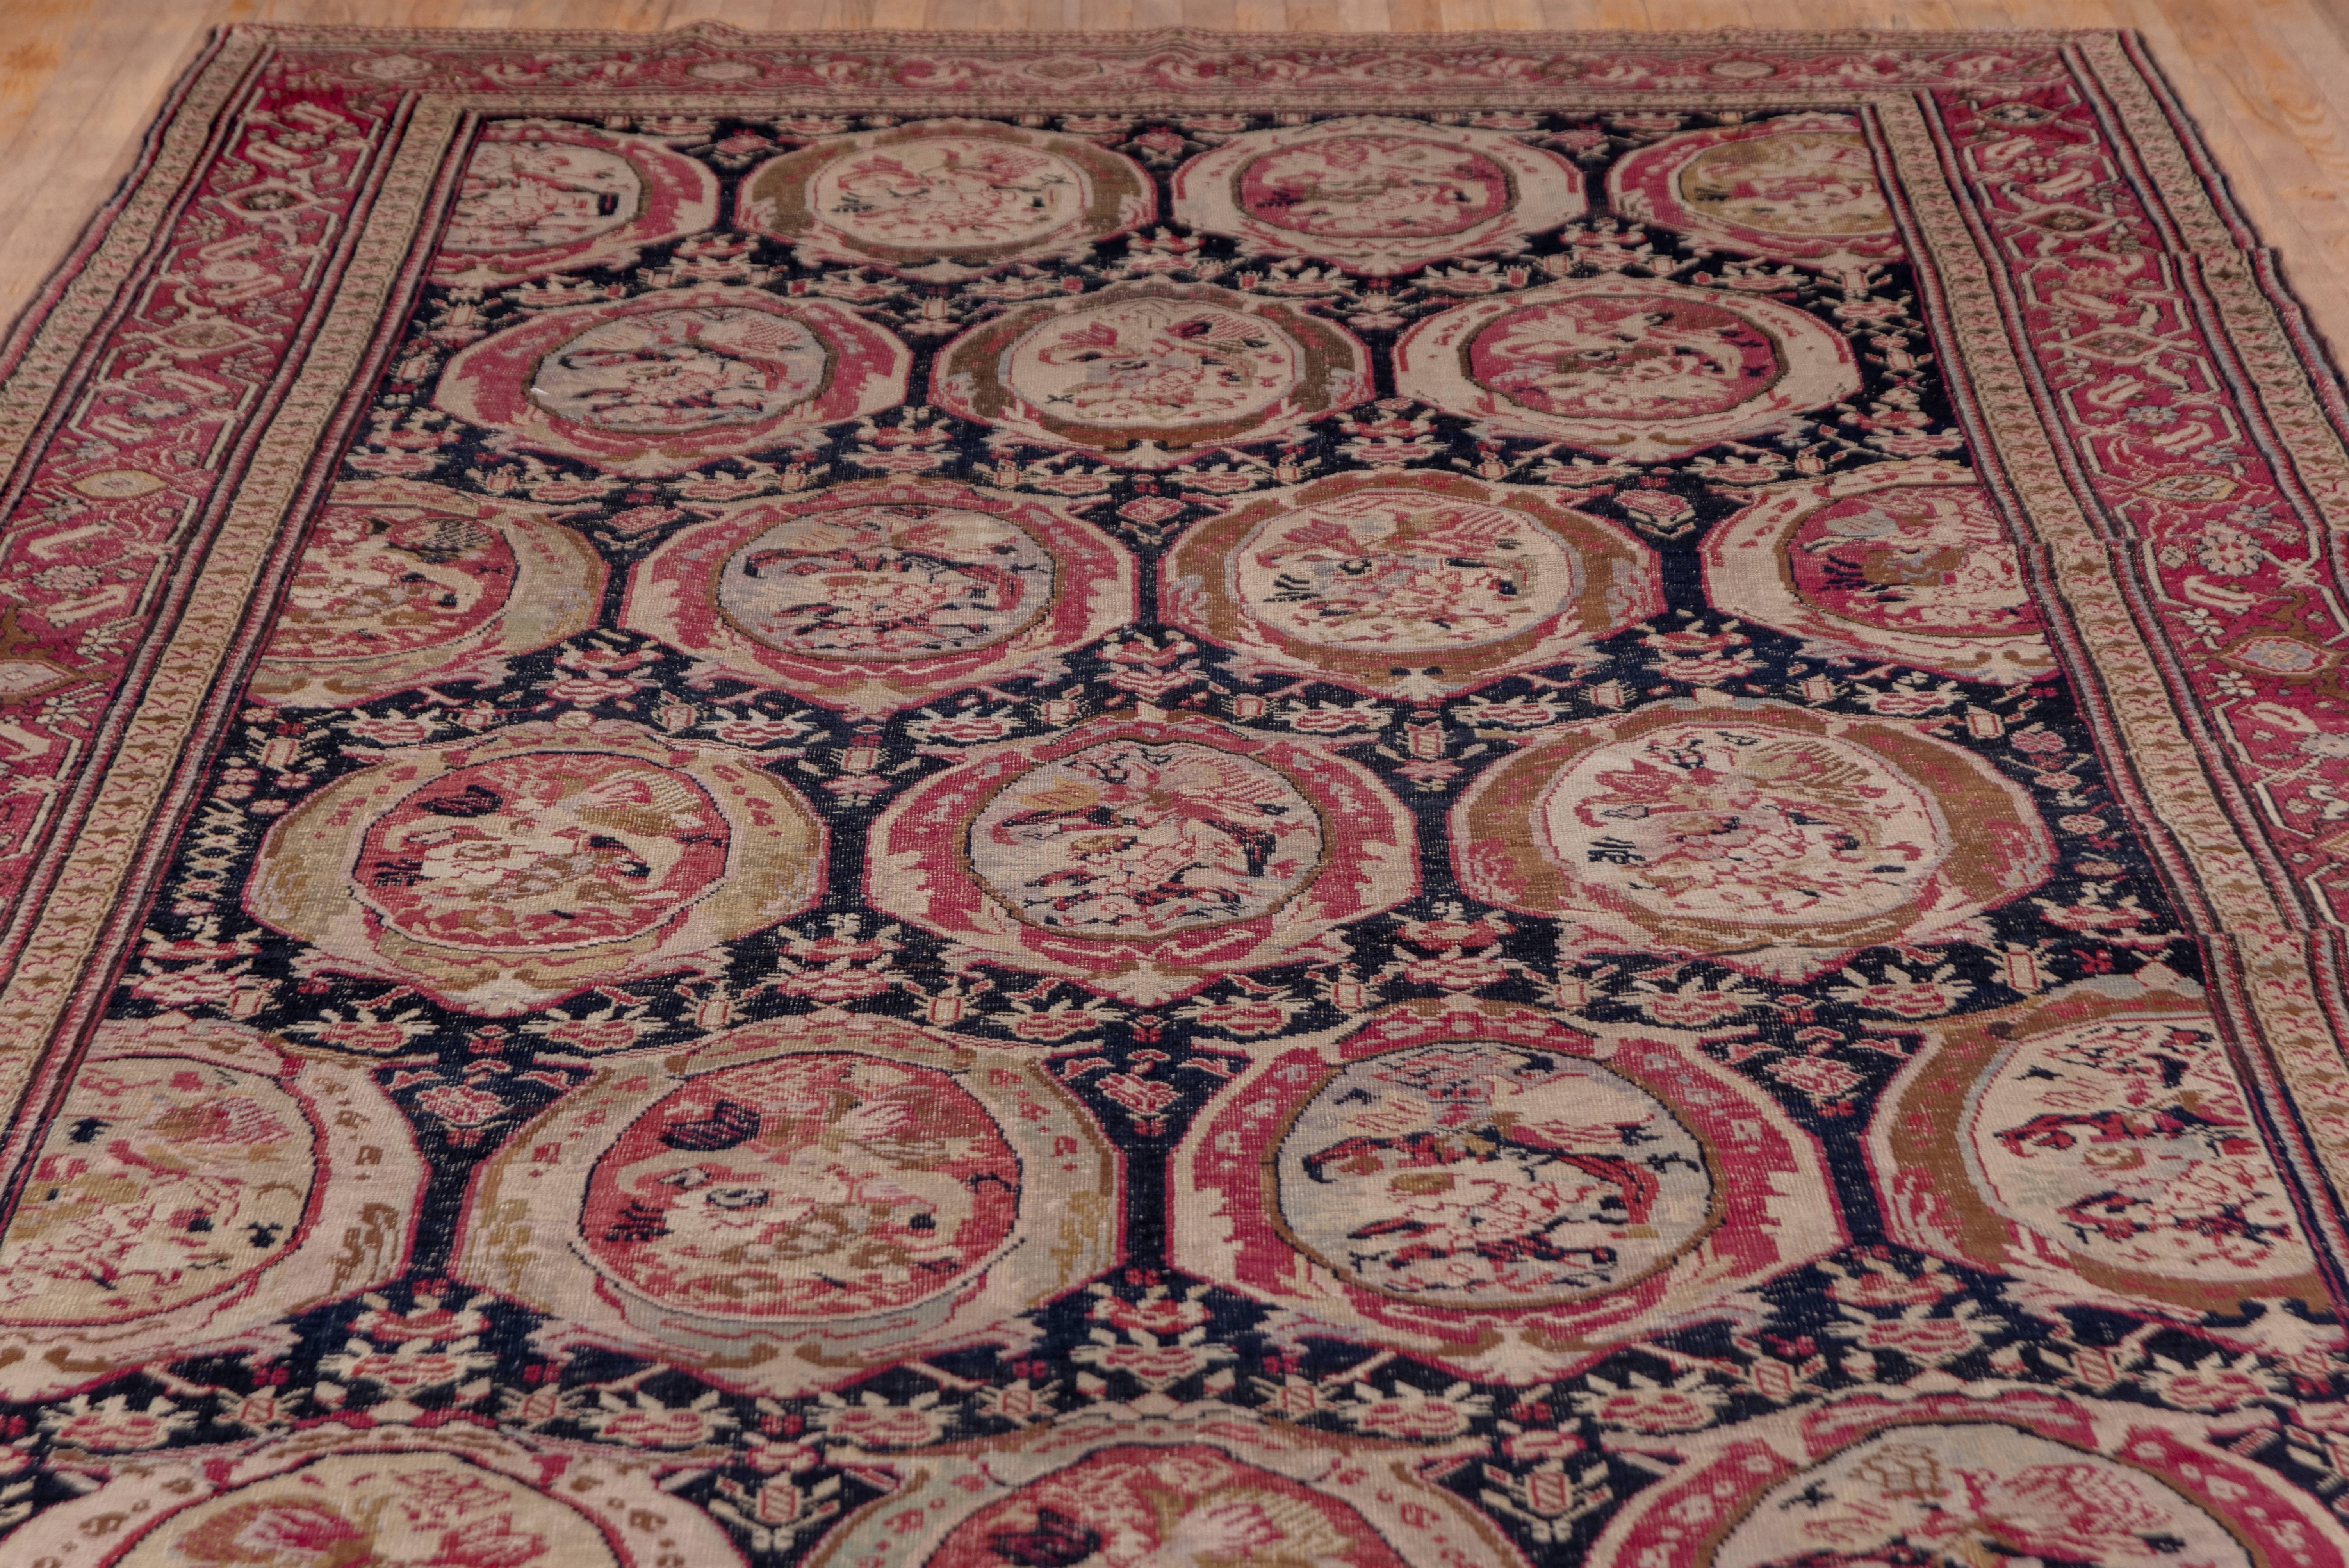 This south Caucasian carpet is in the Russian style with columns of elliptical 